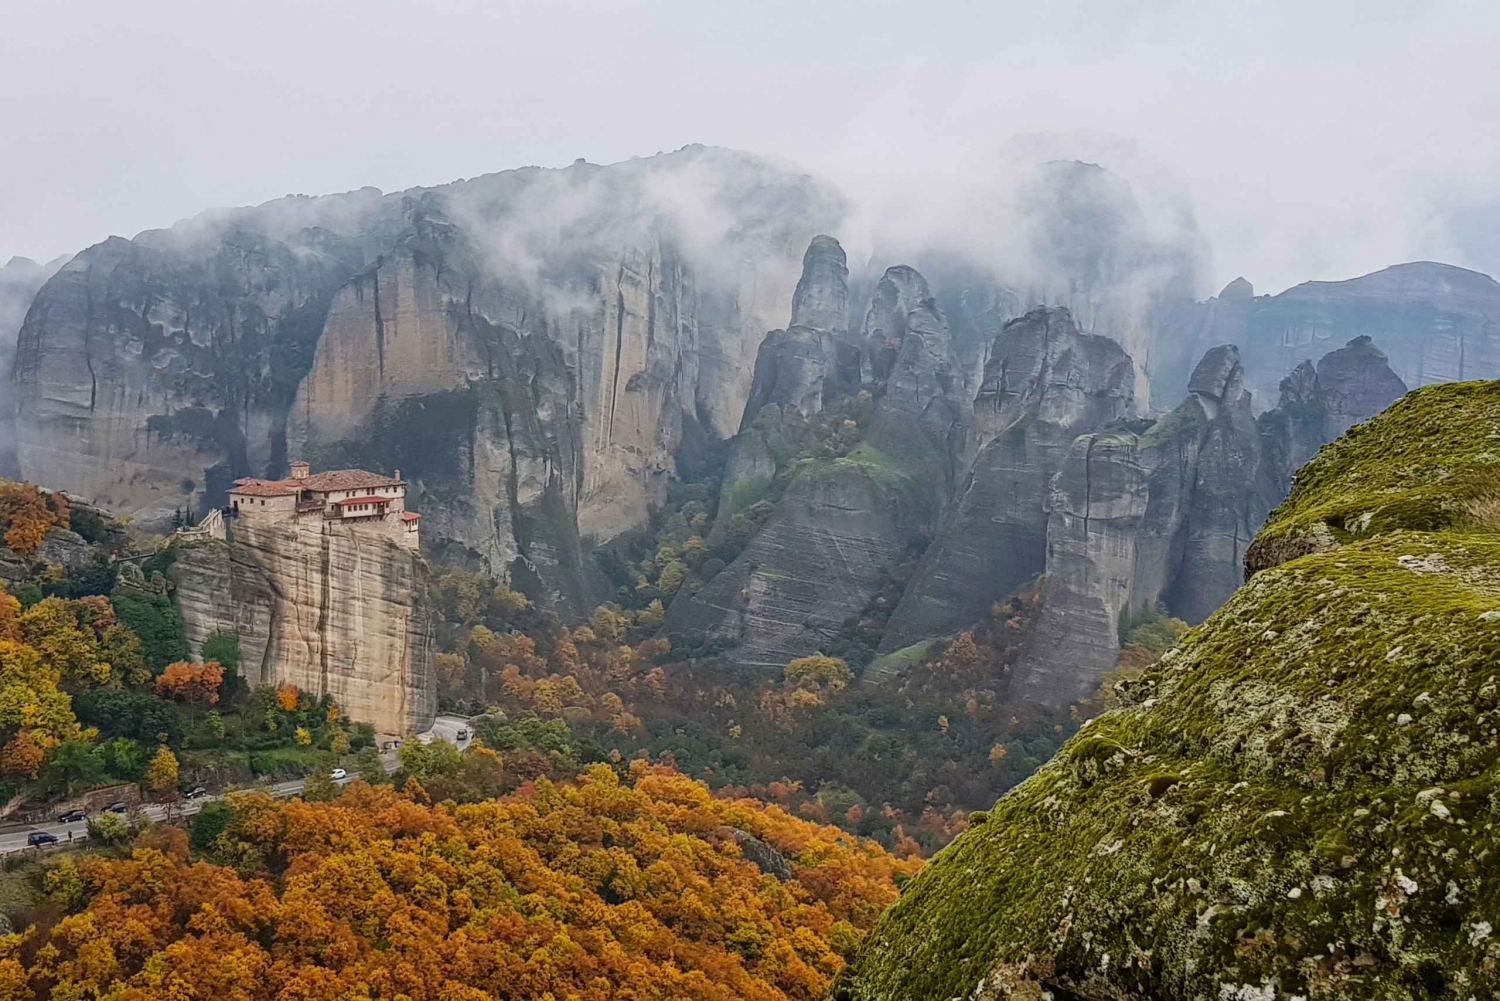 Athens: Meteora Small-Group Day Trip & Visit to Thermopylae